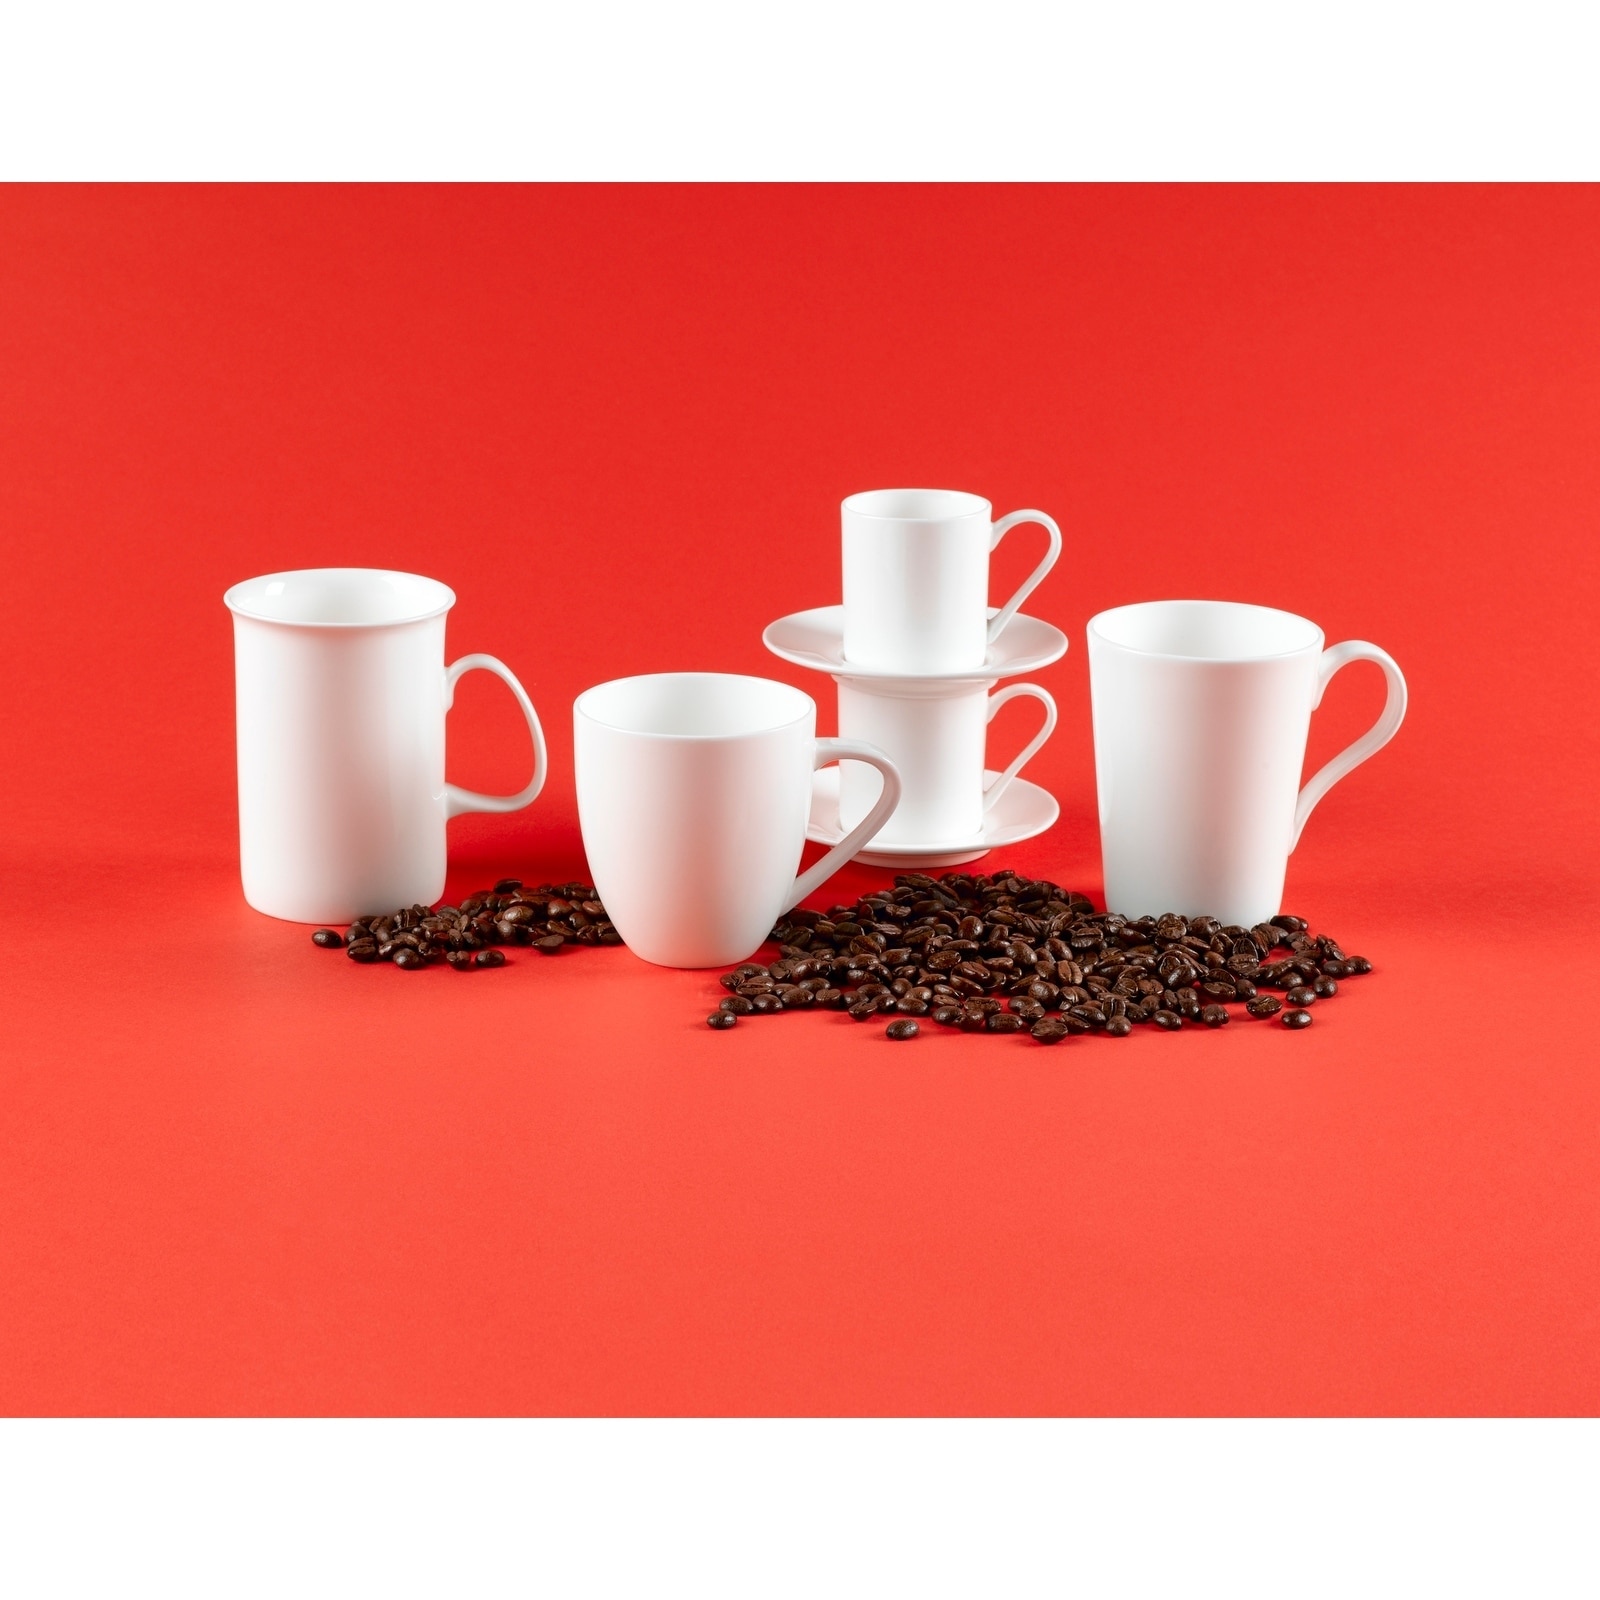 https://ak1.ostkcdn.com/images/products/10450735/Red-Vanilla-Espresso-Cup-Saucer-5oz-Set-of-4-34fd6159-3207-41f7-8a24-06b2cf7e817c.jpg